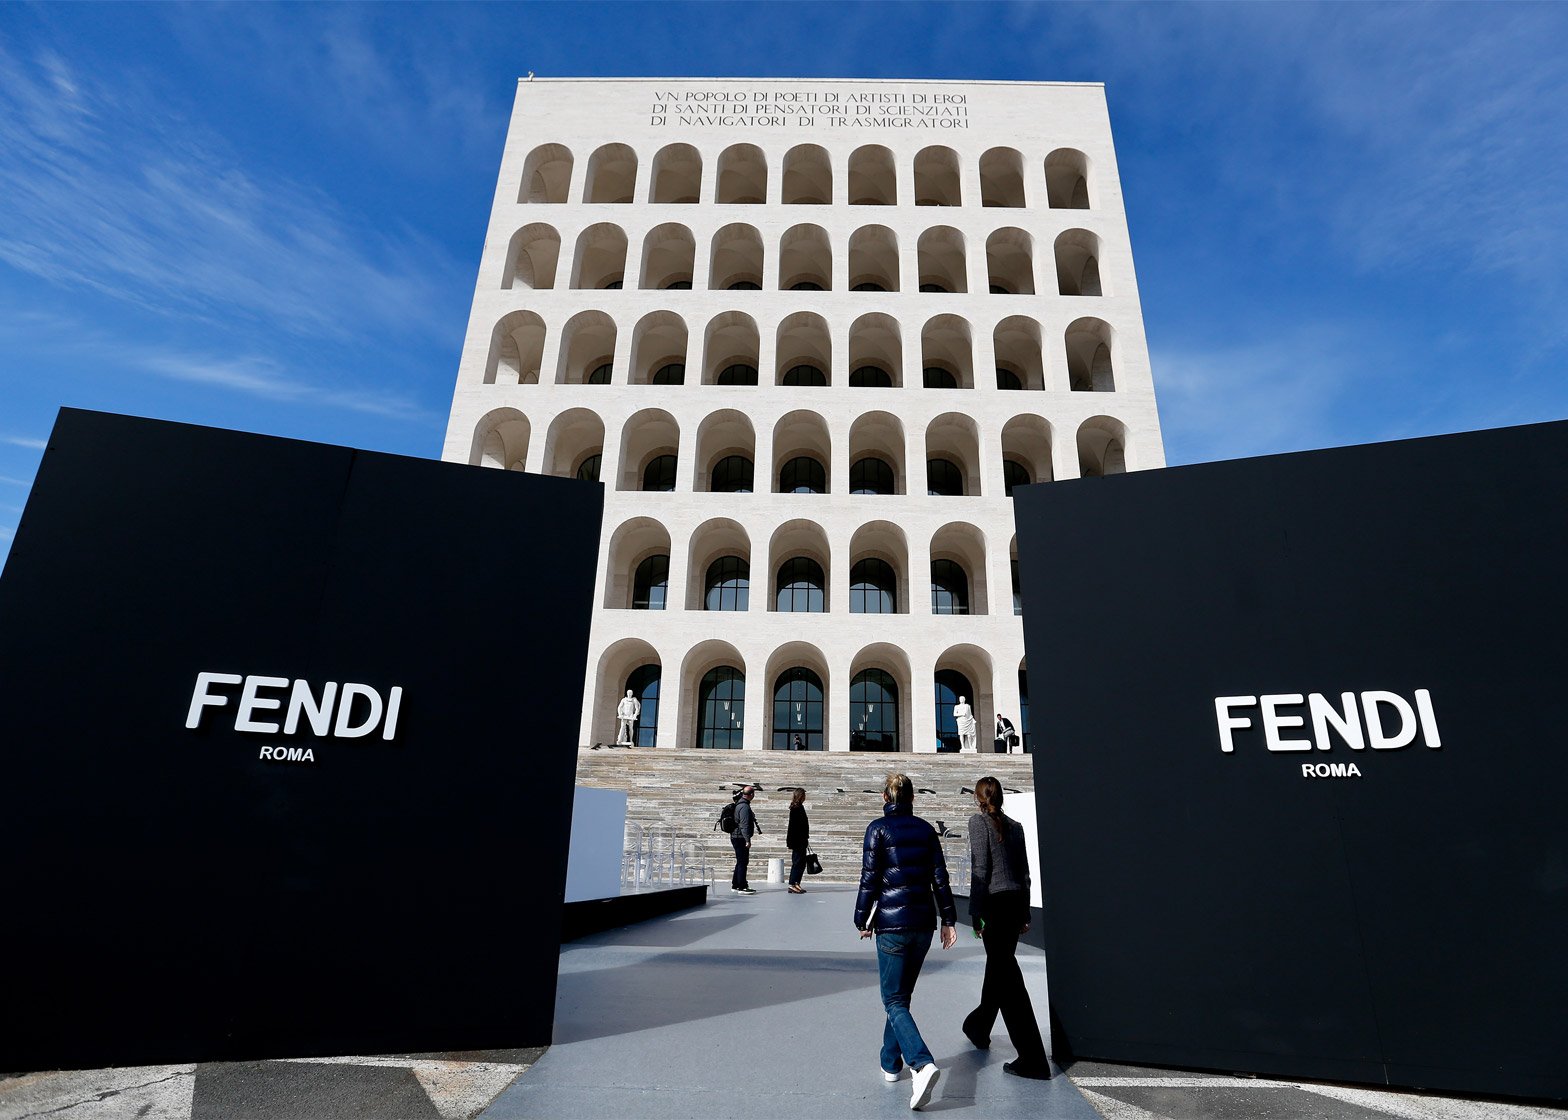 Shopping at the #fendi flagship store in #roma was fun and 💰💰💰💰#fy, fendi